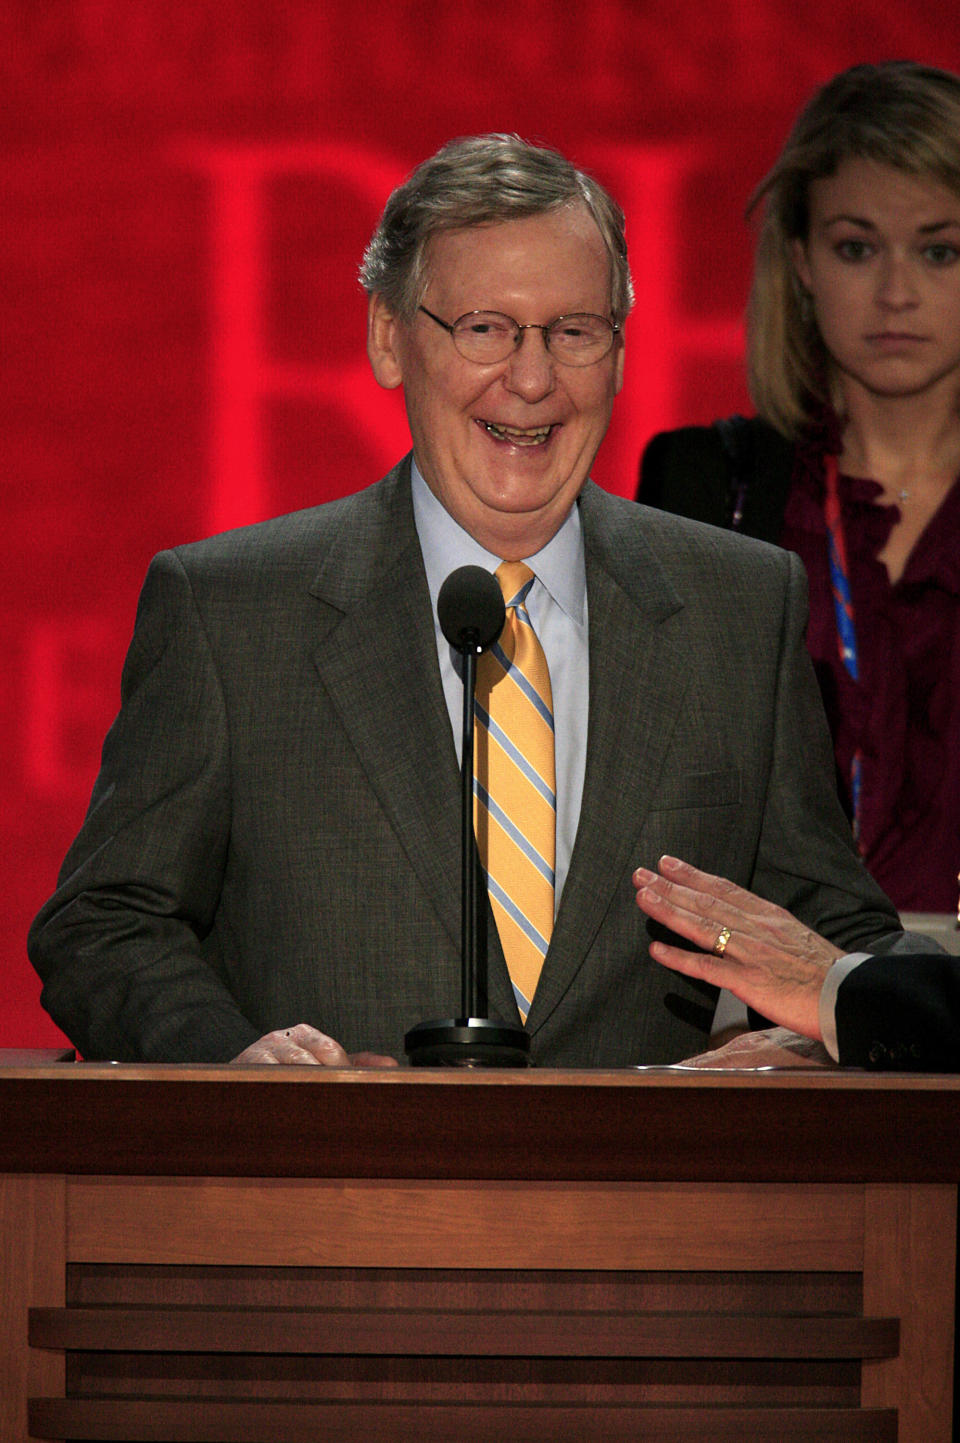 McConnell smiles during sound check at the Republican National Convention (RNC) in Tampa, Fla., Aug 27, 2012. (Scott Eells/Bloomberg via Getty)